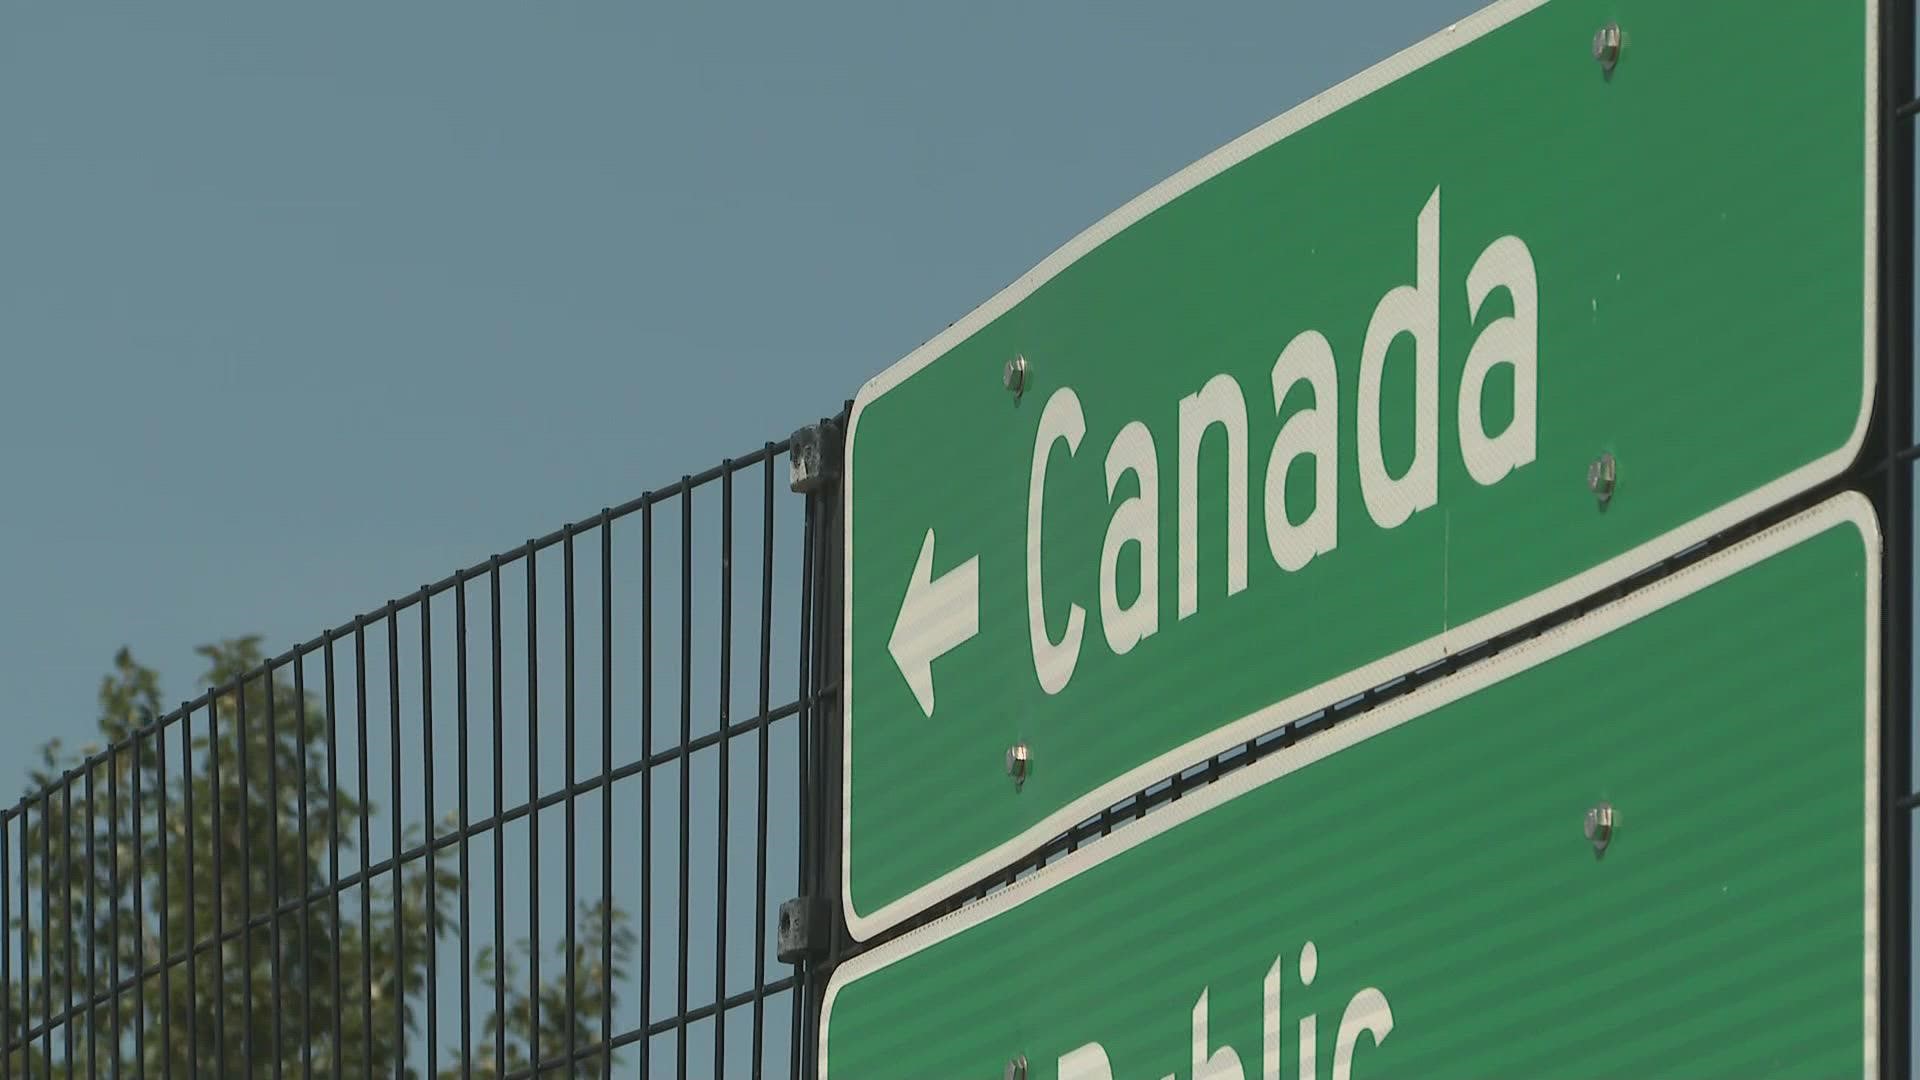 Canada has opened its border to vaccinated U.S. citizens for non-essential travel on Monday, August 9.